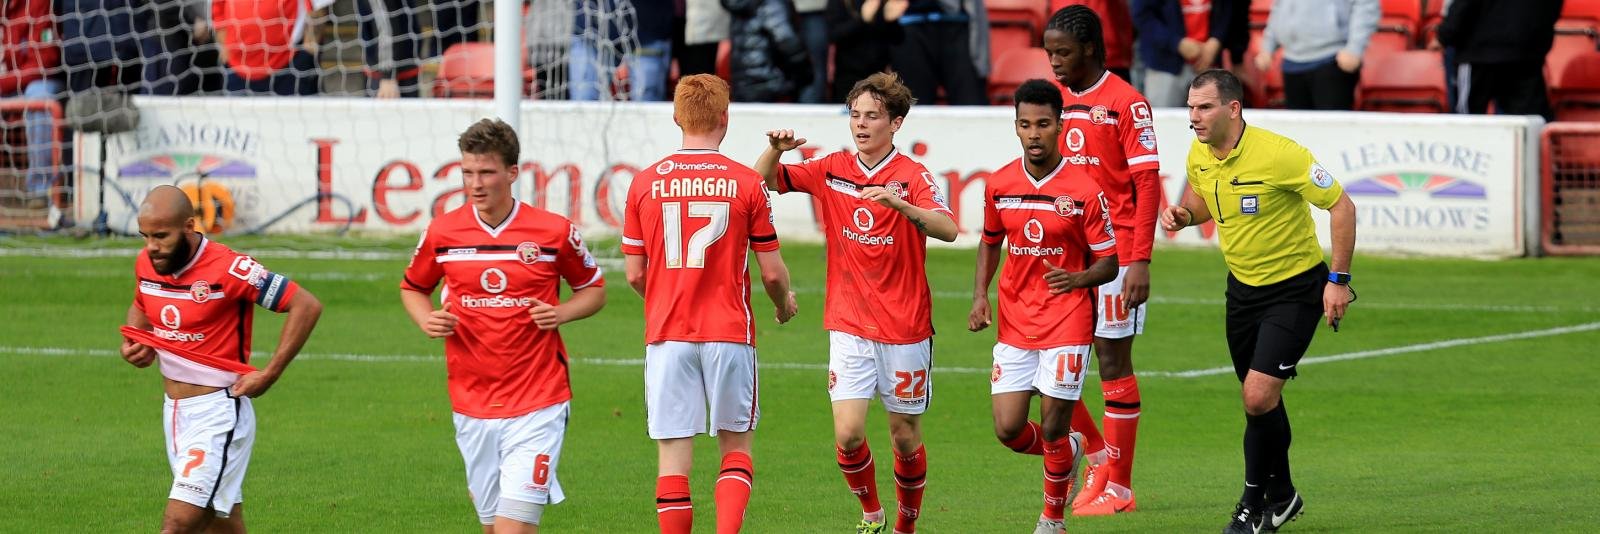 Walsall vs Barnsley: League One Play-Off Preview & Prediction